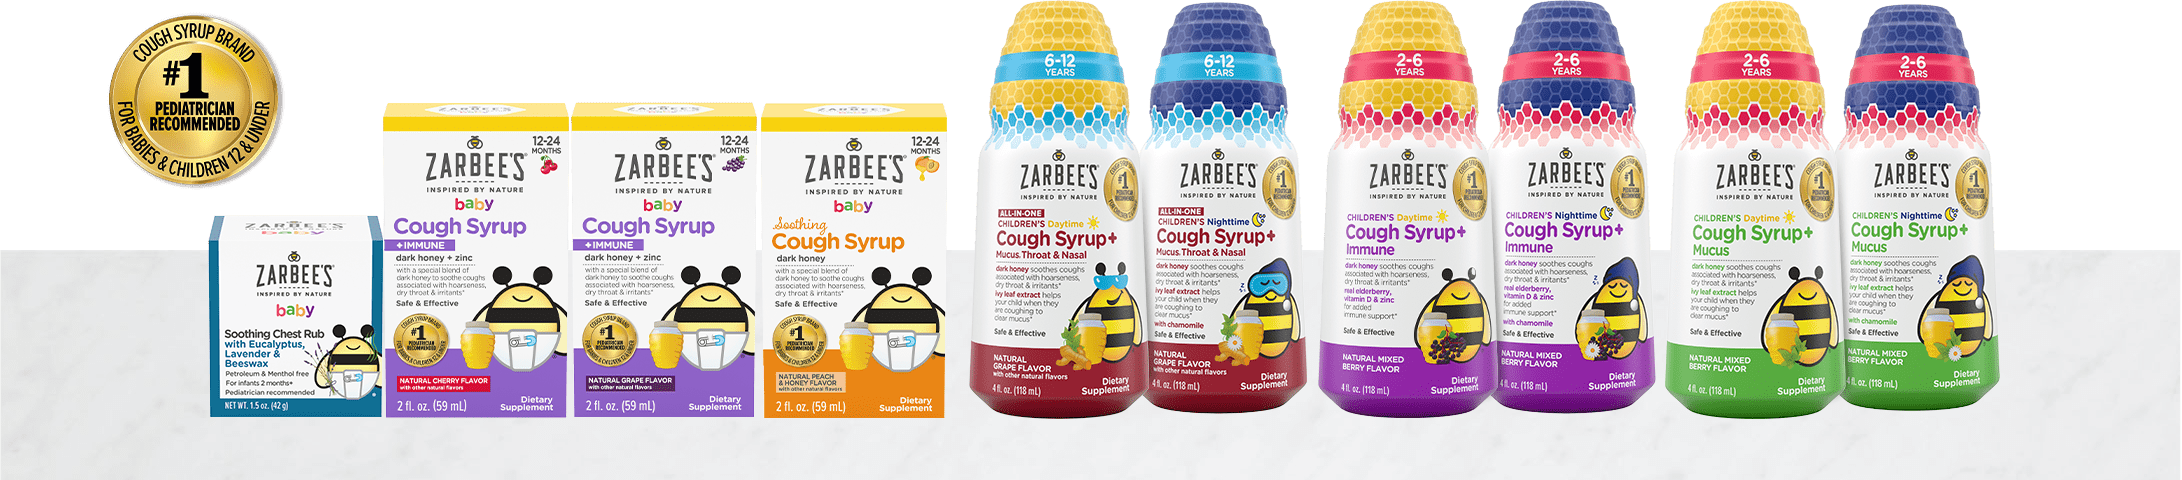 Zarbee’s upper respiratory and cough product packages